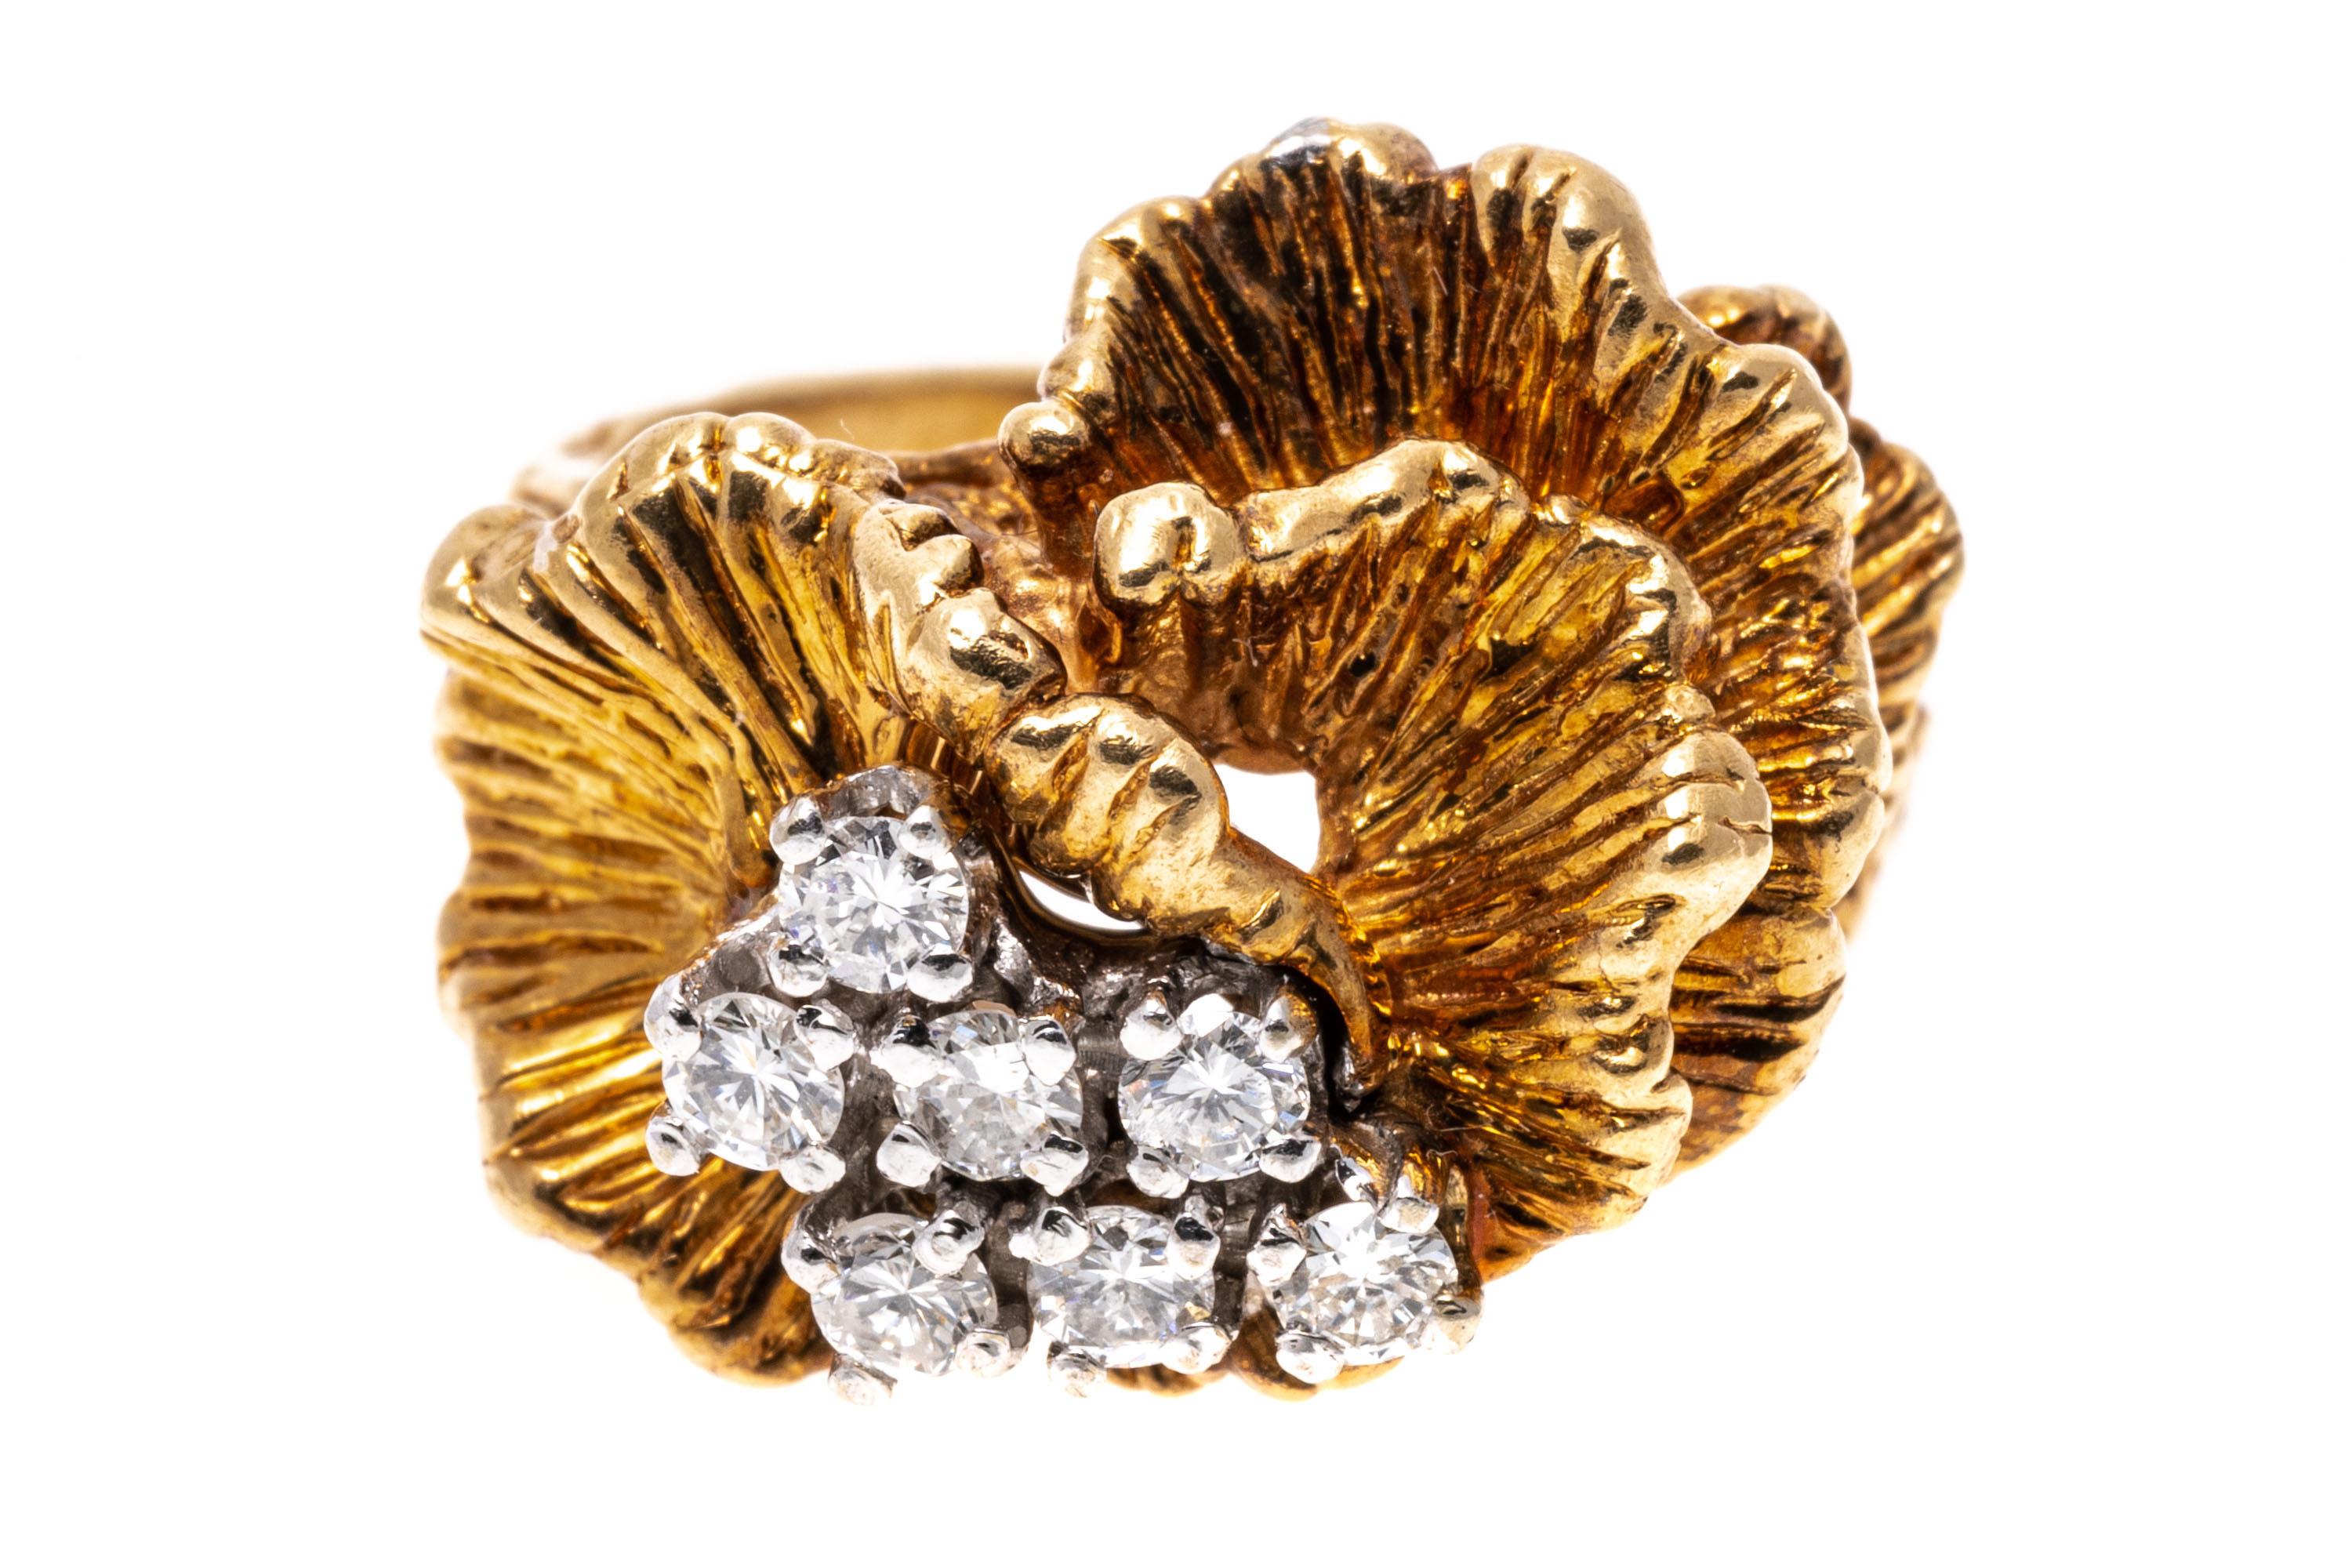 14k yellow gold ring. This beautiful and unusual ring is a chased cockscomb form, decorated with a cluster of round brilliant cut diamonds, approximately 0.23 TCW, prong set. The ring is finished by split shoulders and a double shank, patterned in a